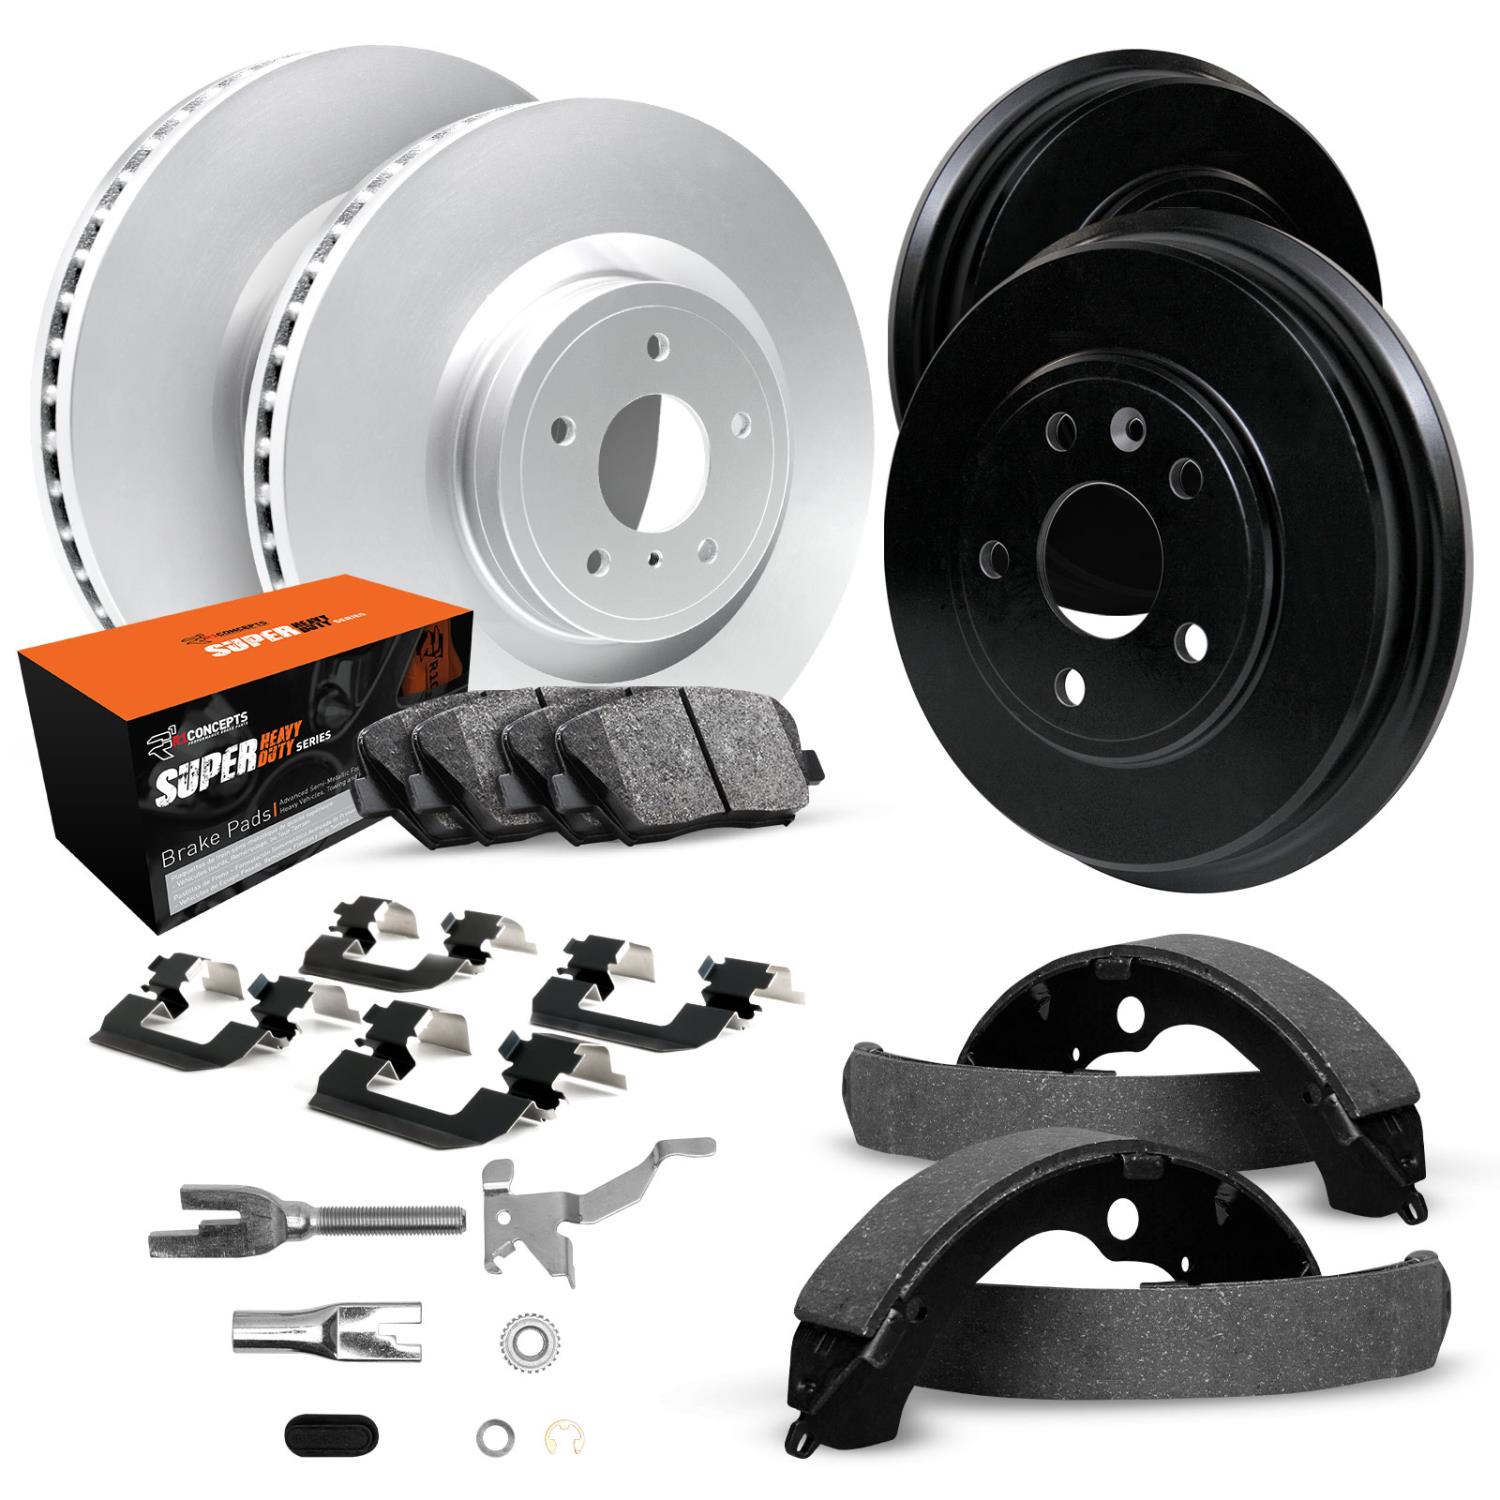 GEO-Carbon Brake Rotor & Drum Set w/Super-Duty Pads, Shoes, Hardware/Adjusters, 1971-1975 GM, Position: Front & Rear